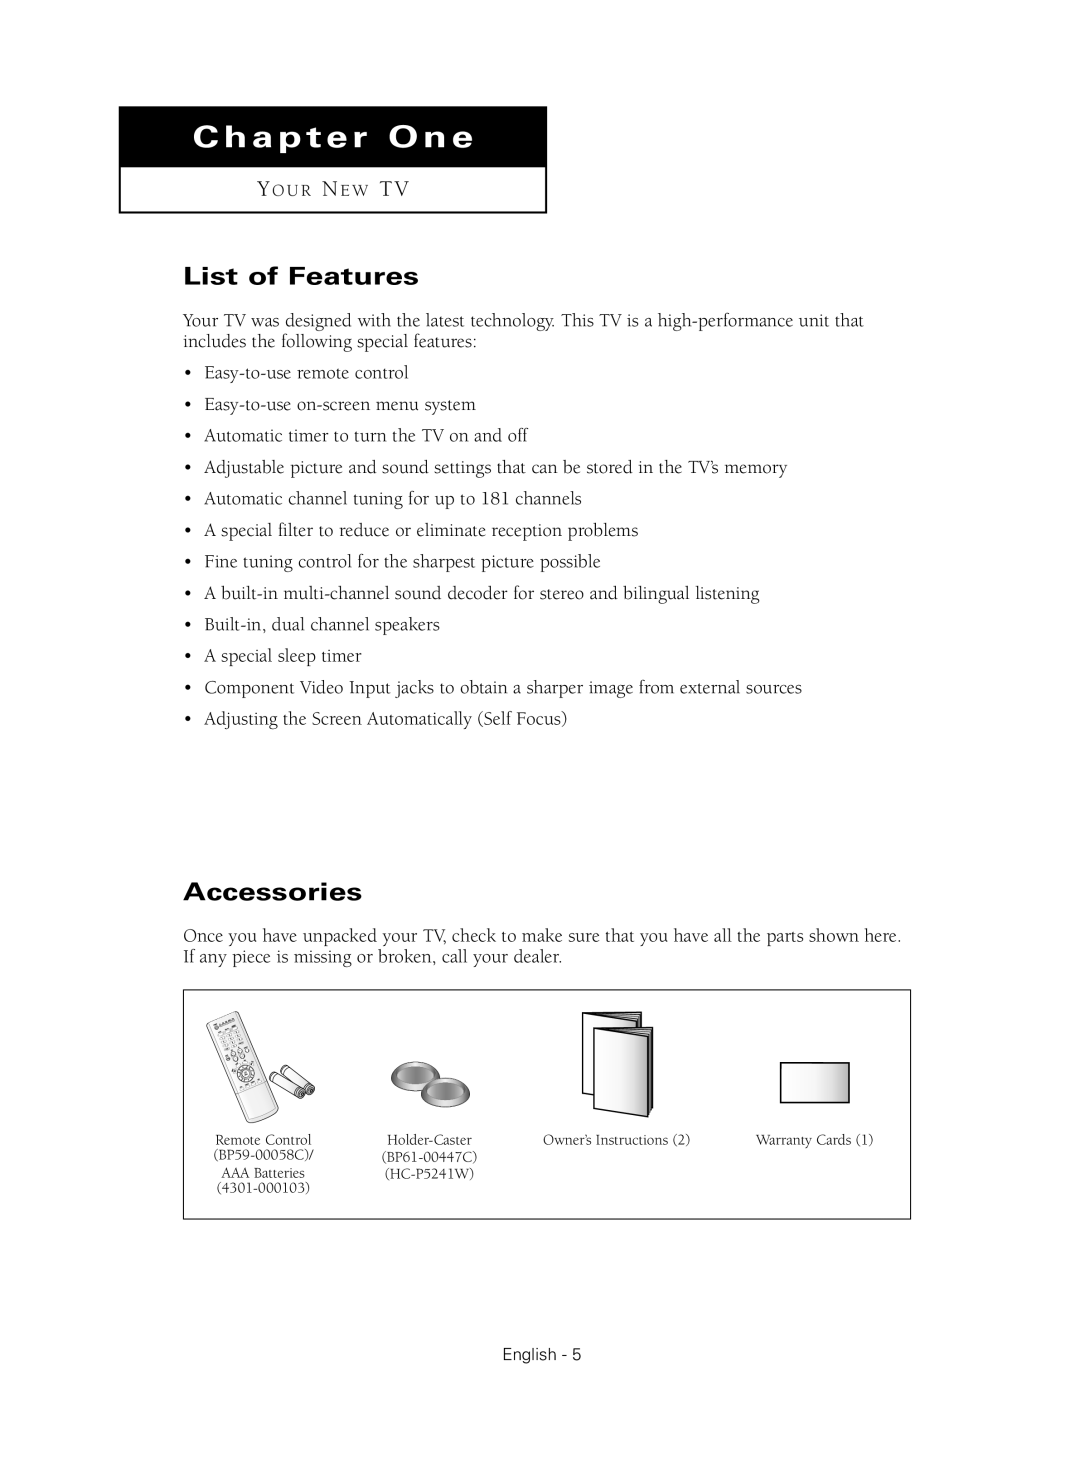 Samsung HC-P4241W manual Chapter One, List of Features, Accessories 